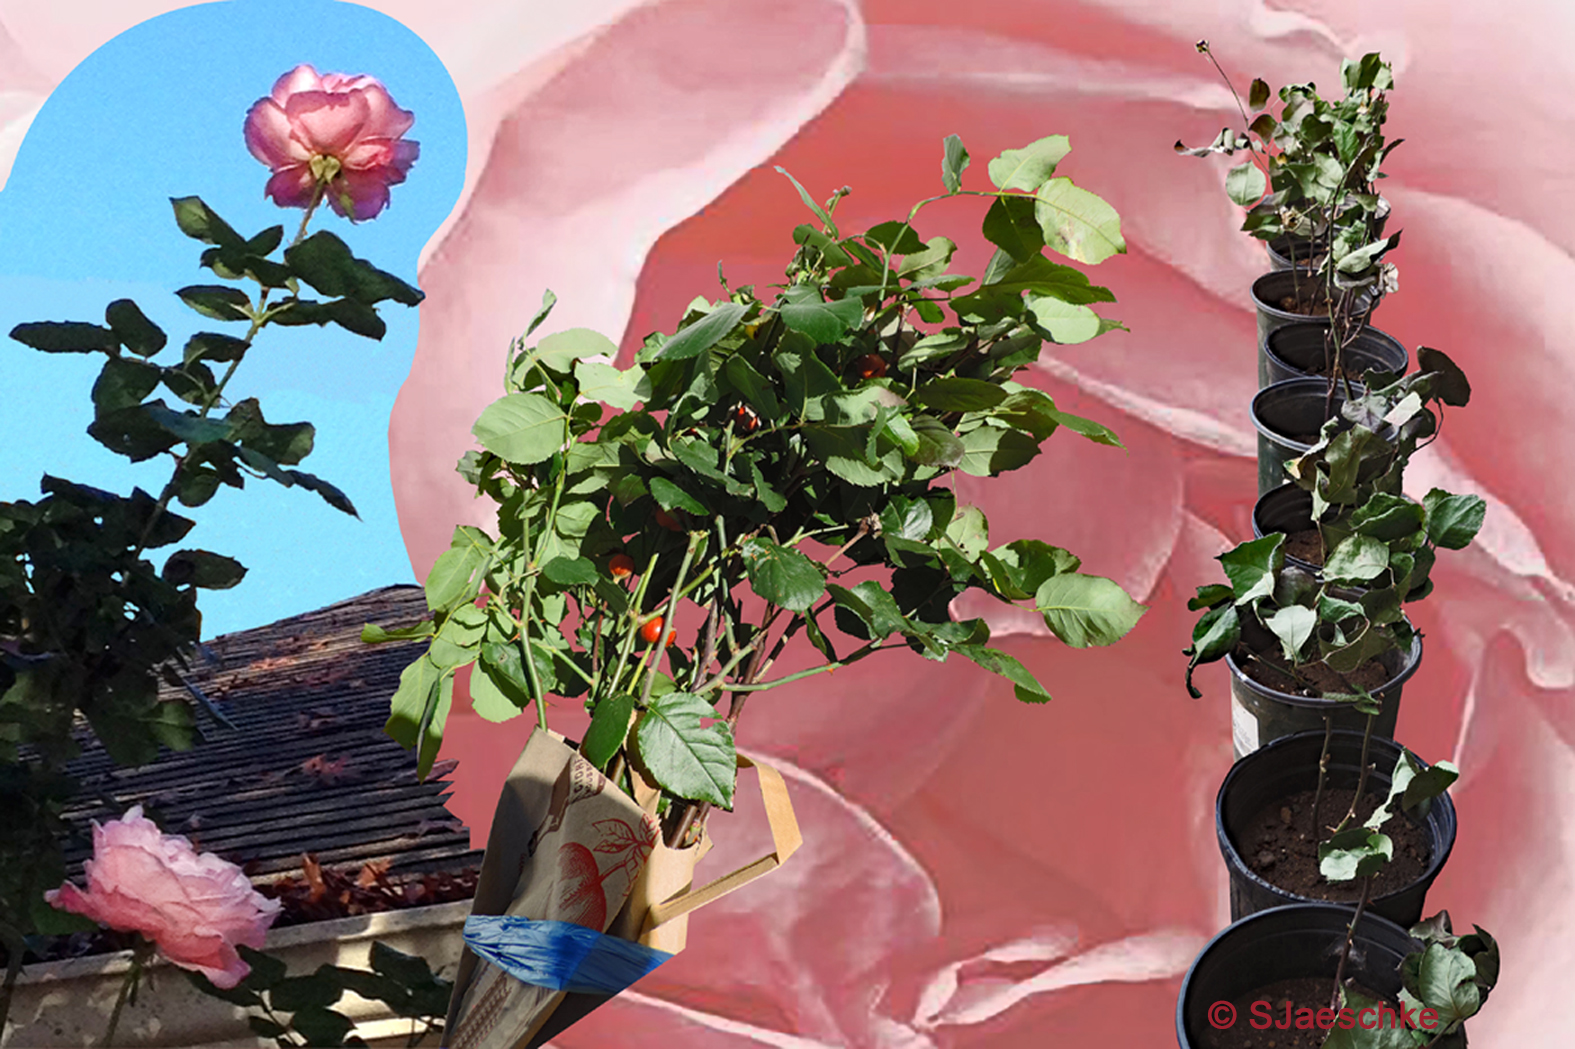 Post_2016-02-10_RoseCollage